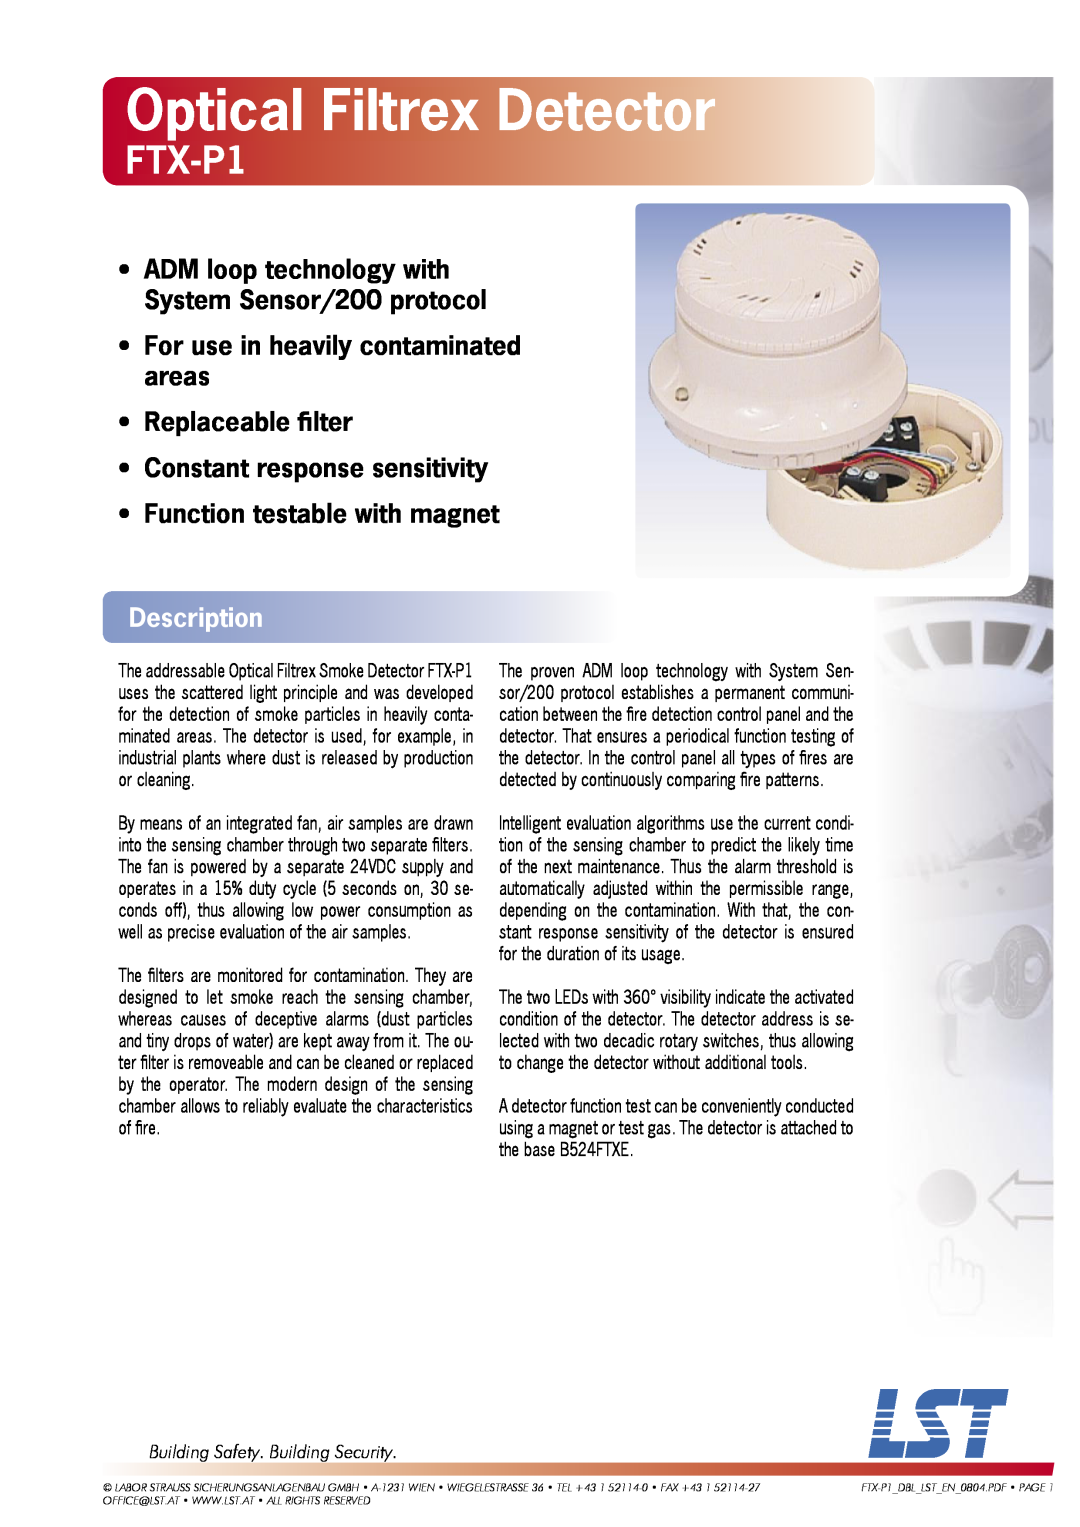 LST FTX-P1 manual Description, Building Safety. Building Security, Optical Filtrex Detector, Function testable with magnet 